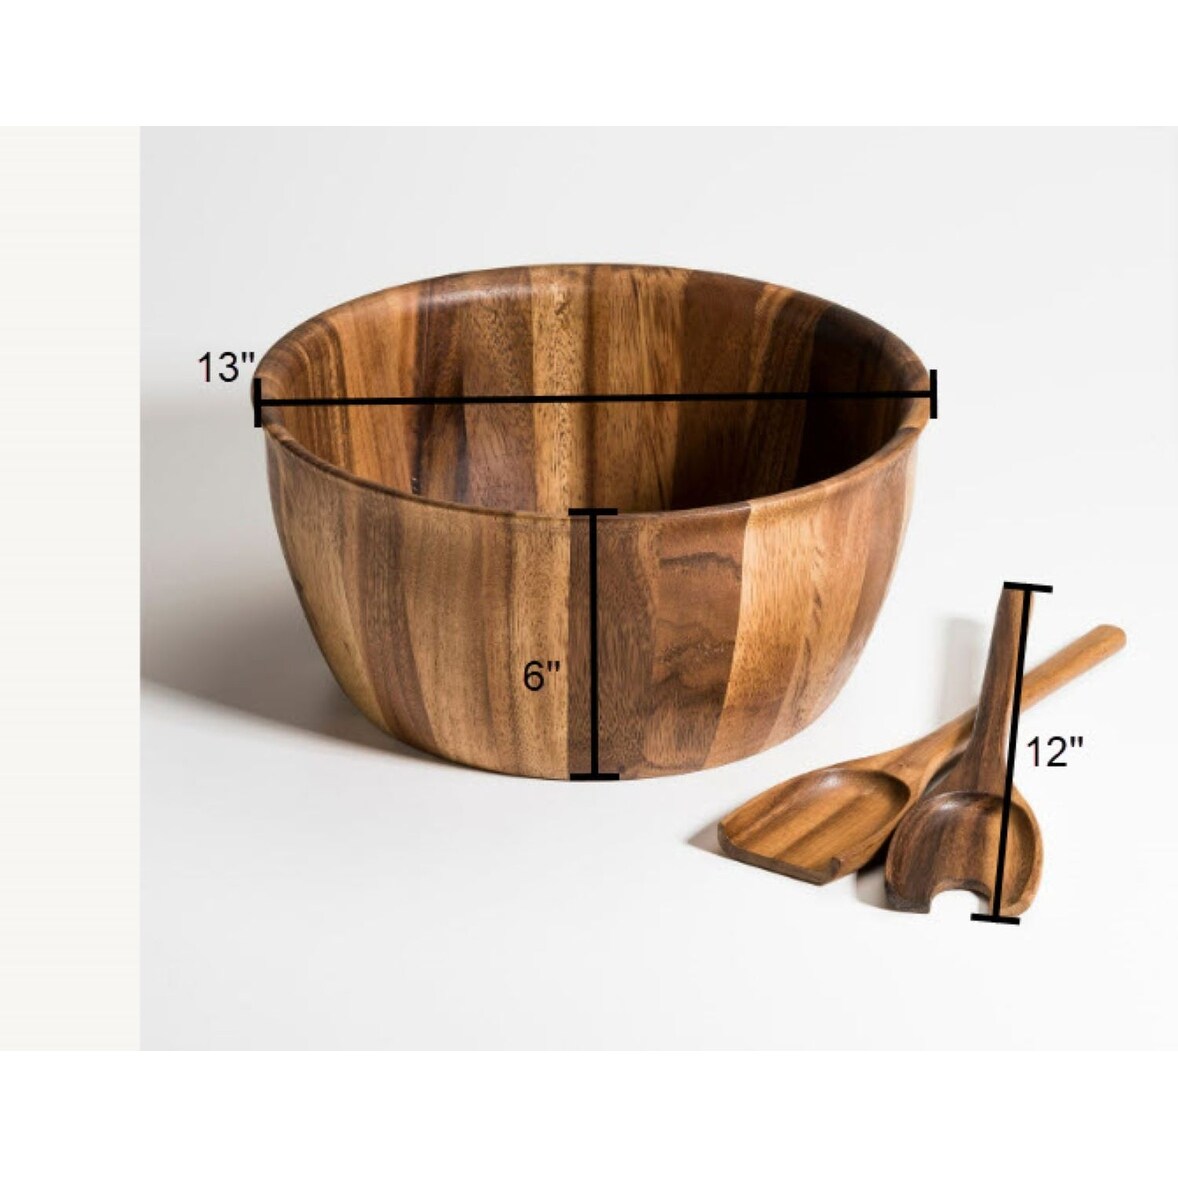 https://ak1.ostkcdn.com/images/products/is/images/direct/a4ac8ac71a942dc40b9fb81226615a31b80975ed/Extra-Large-Salad-Bowl-with-Servers--13%22-bowl.jpg